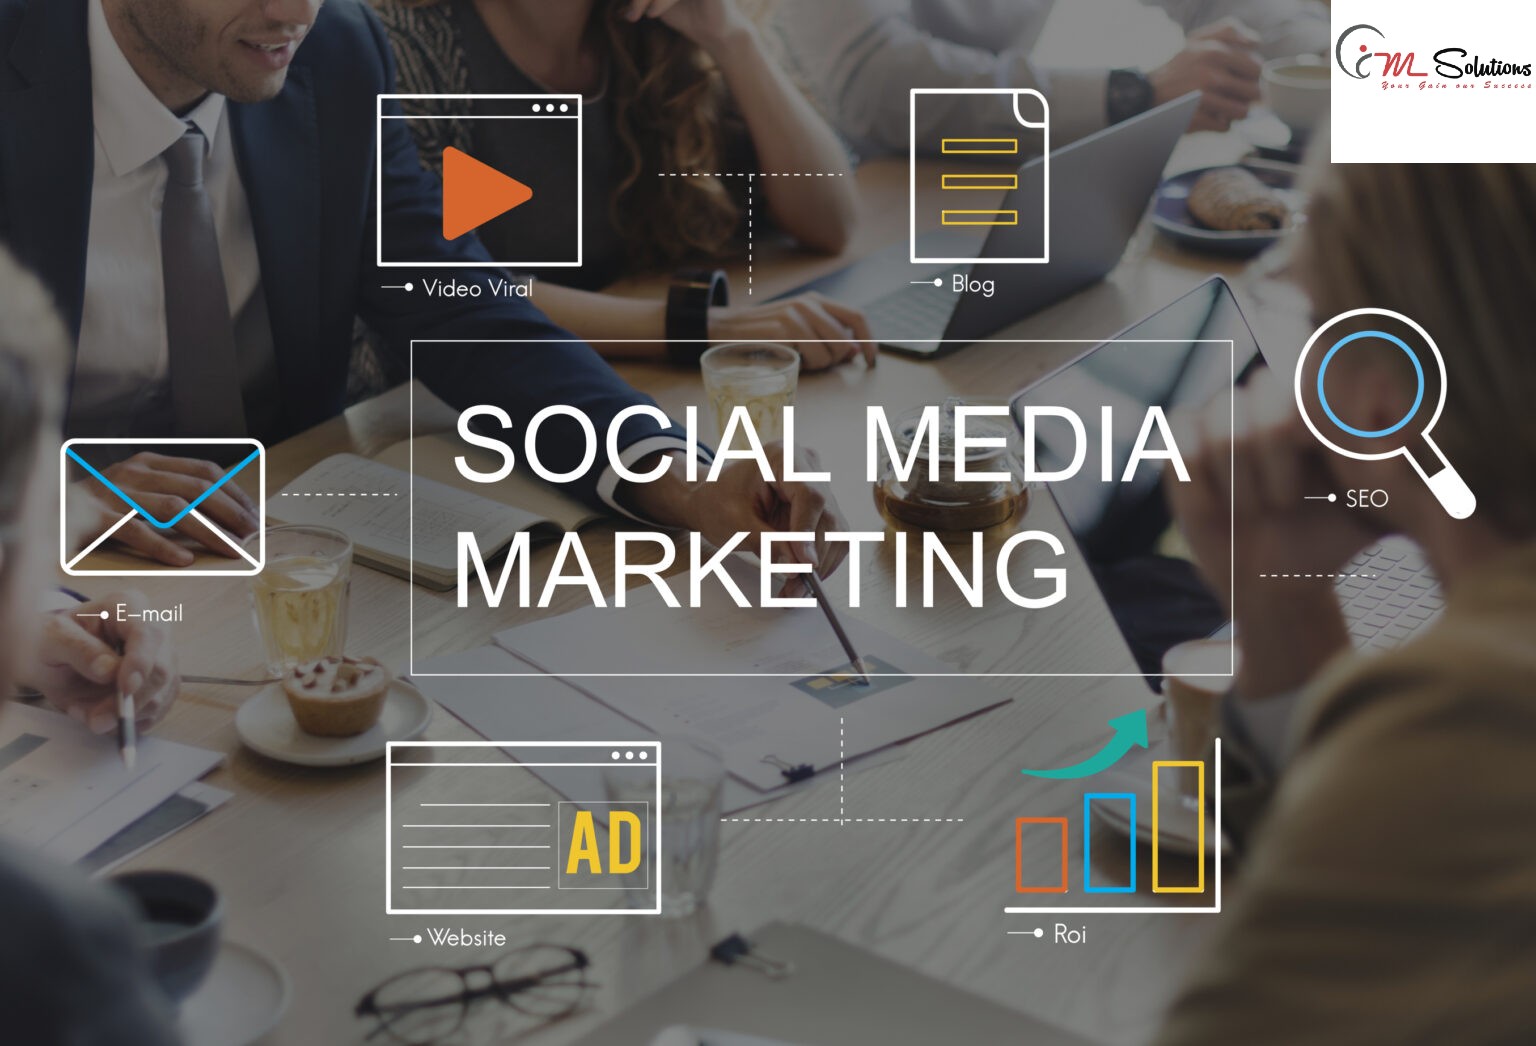 Go with IM Solutions top social media advertising company to get the end-to-end social media marketing services. Hire the best SMM Company in Bangalore for your needs.